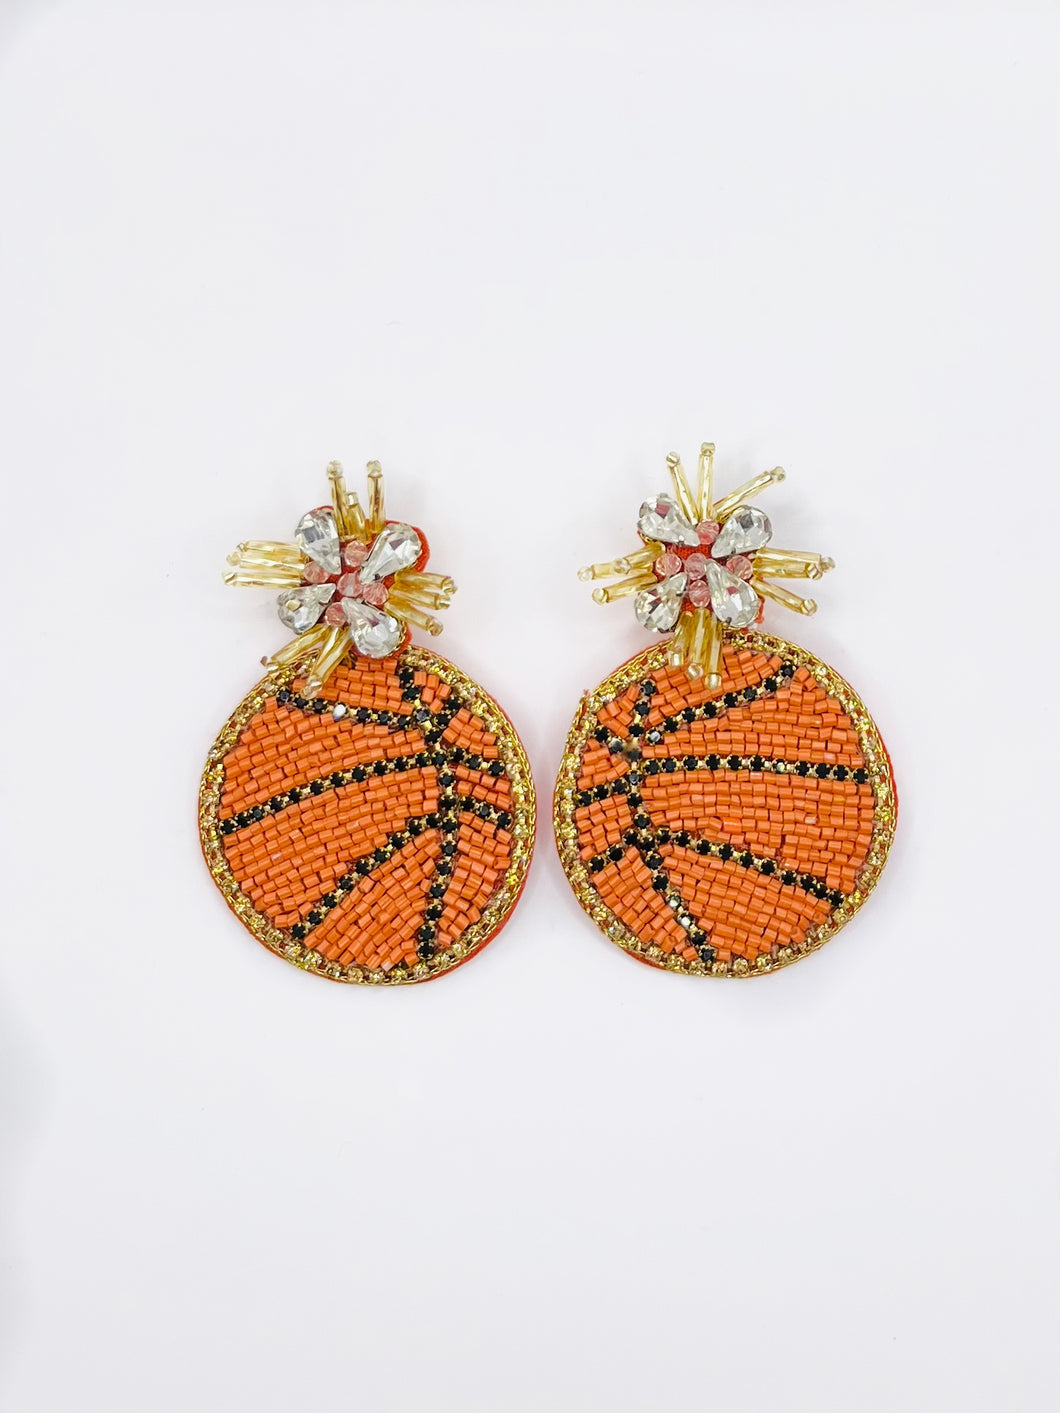 Beaded and Sequin Basketball Earrings/ Game Day/ Tailgate Fashion/ NBA